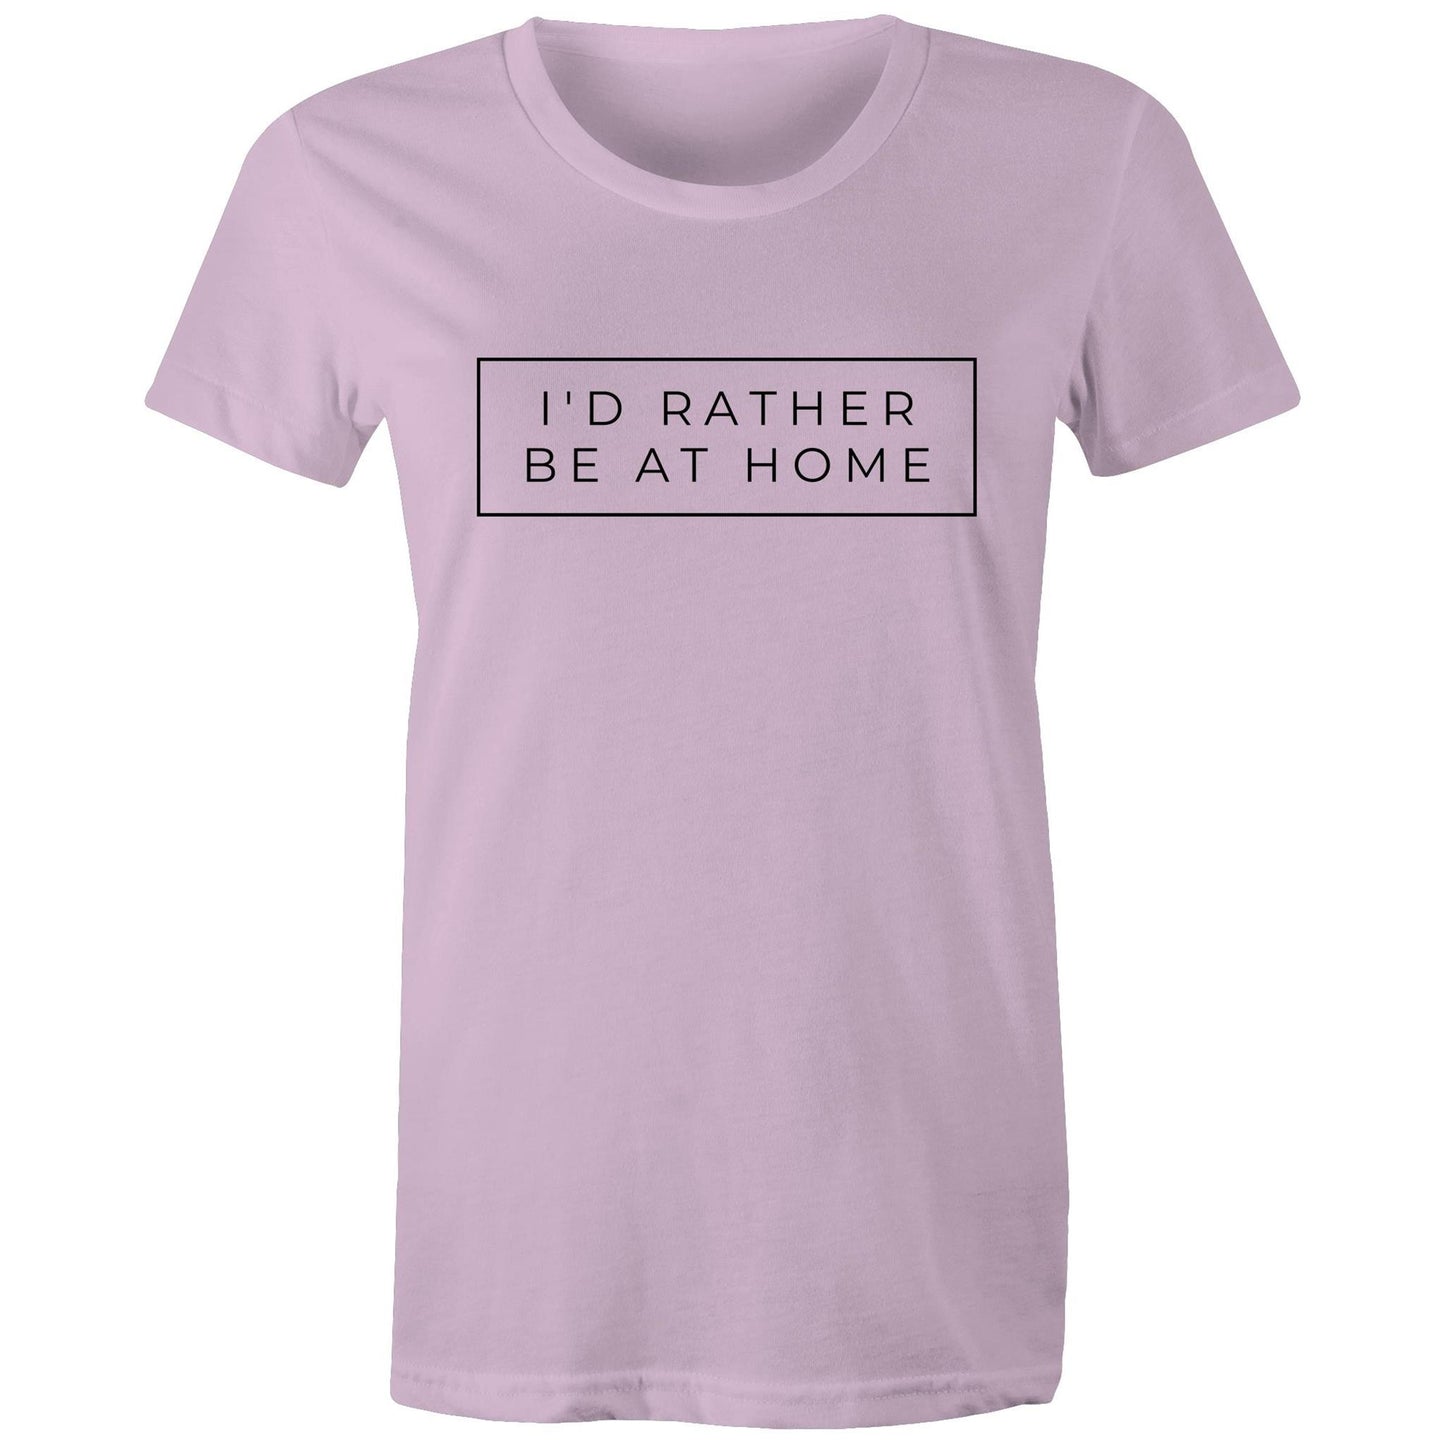 I'd Rather Be At Home - Womens T-shirt Lavender Womens T-shirt home